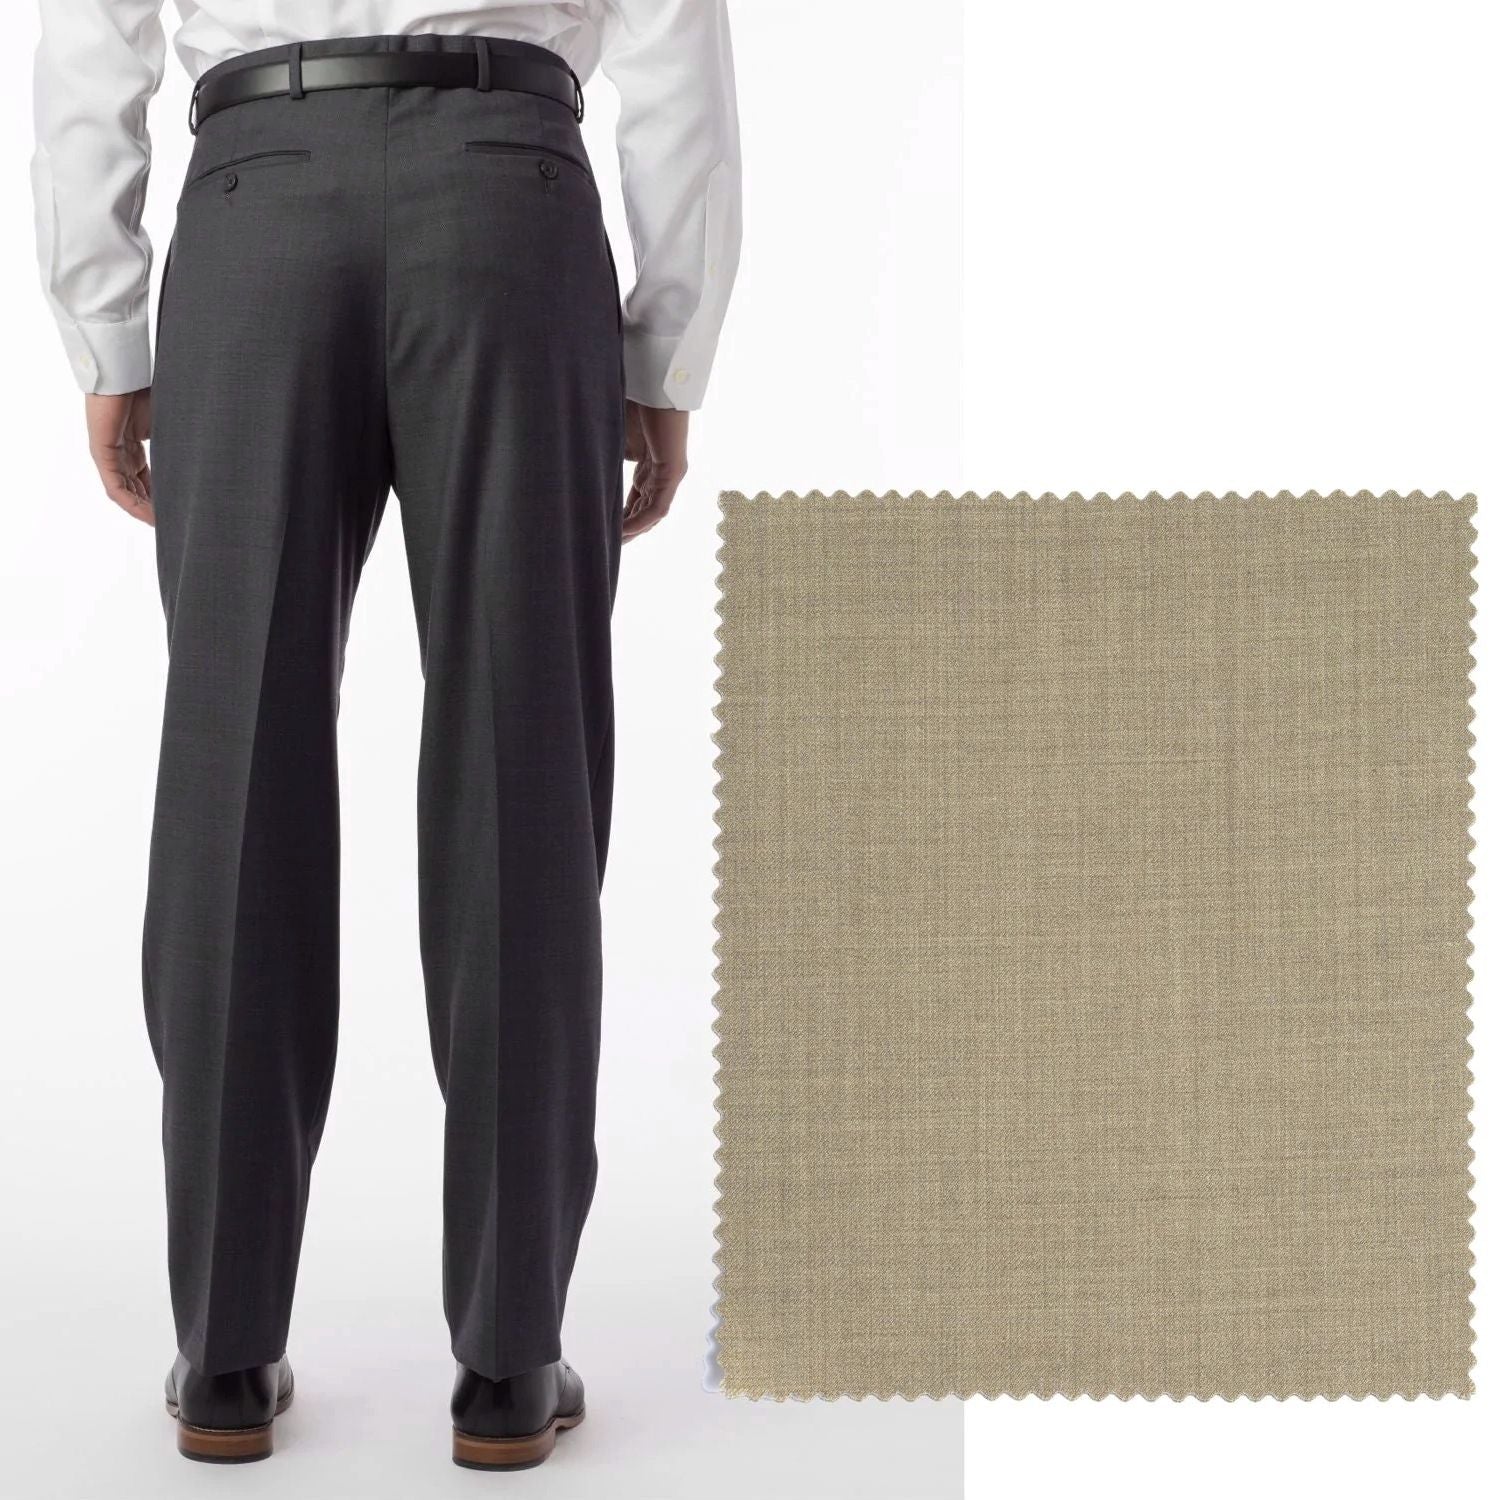 Super 120s Luxury Wool Serge Comfort-EZE Trouser in Oatmeal (Manchester Pleated Model) by Ballin